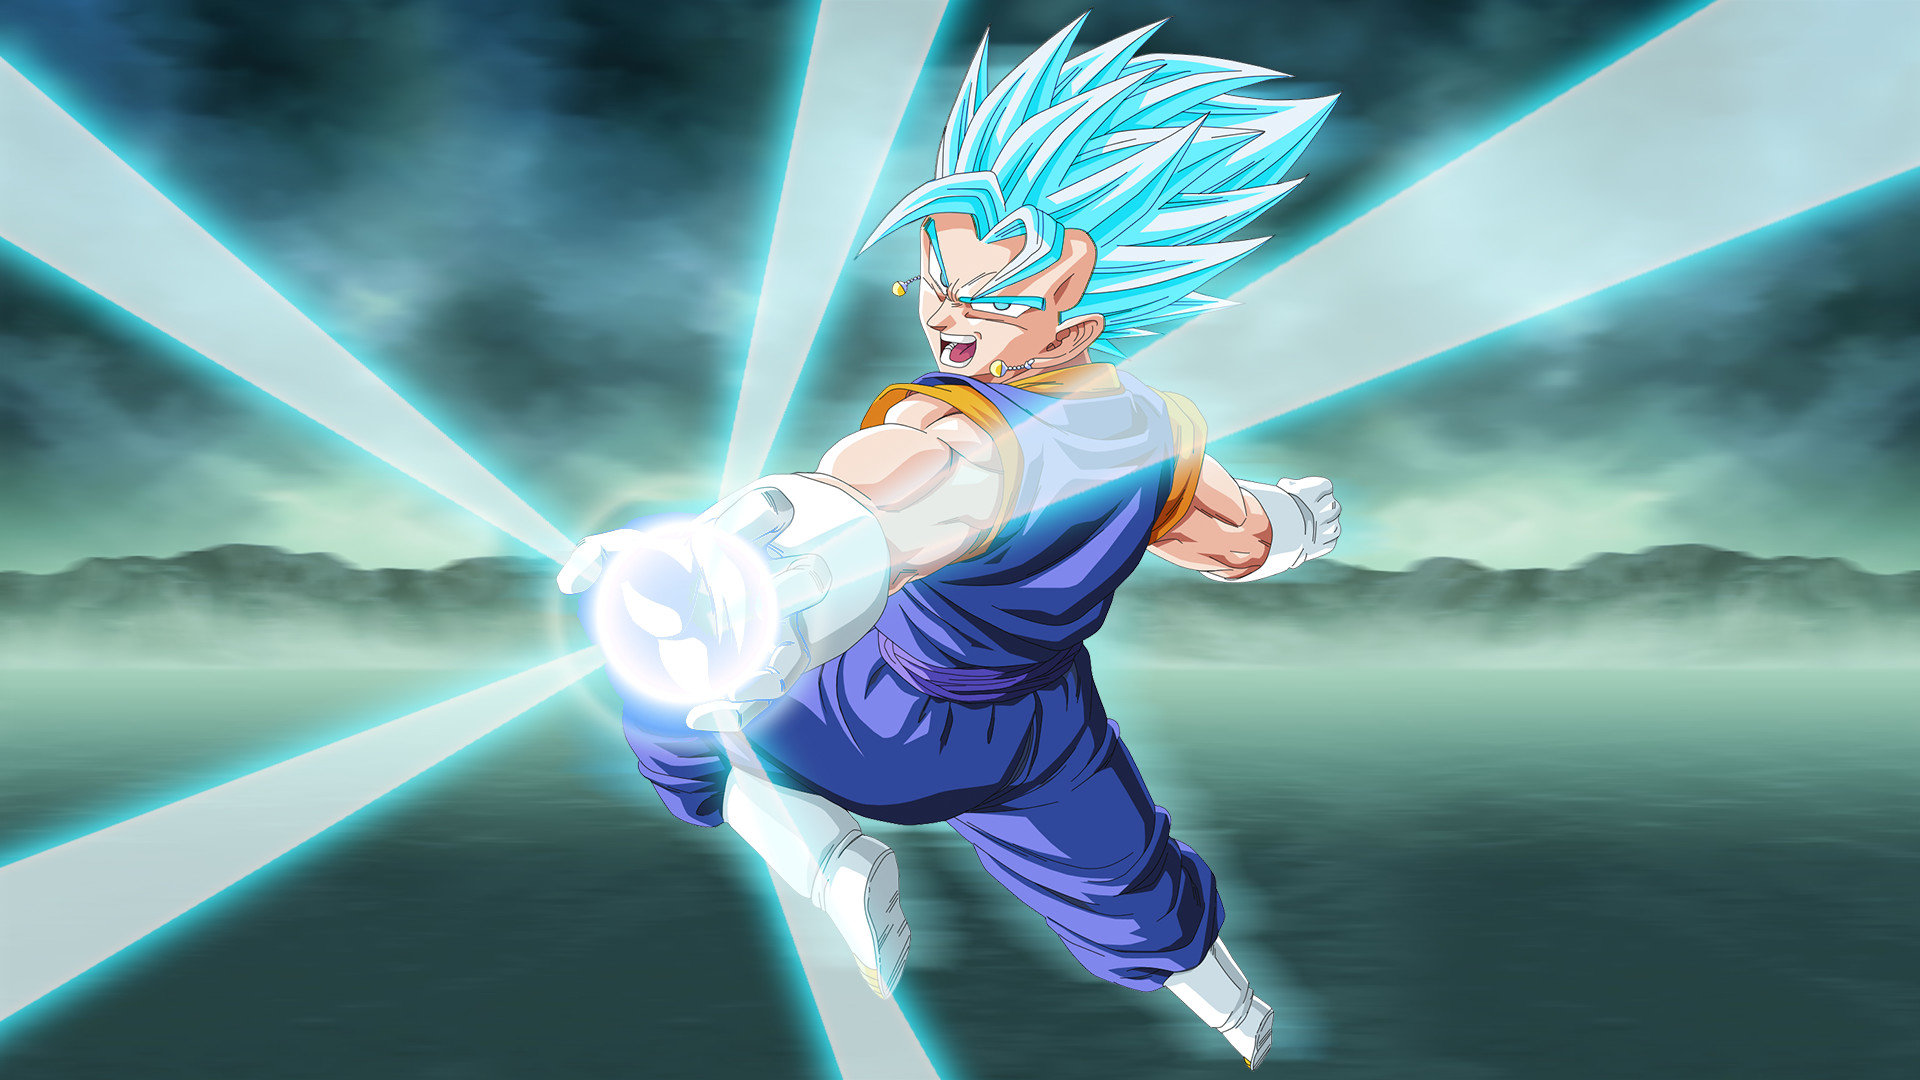 Download full hd 1080p Dragon Ball Super desktop background ID:242518 for free